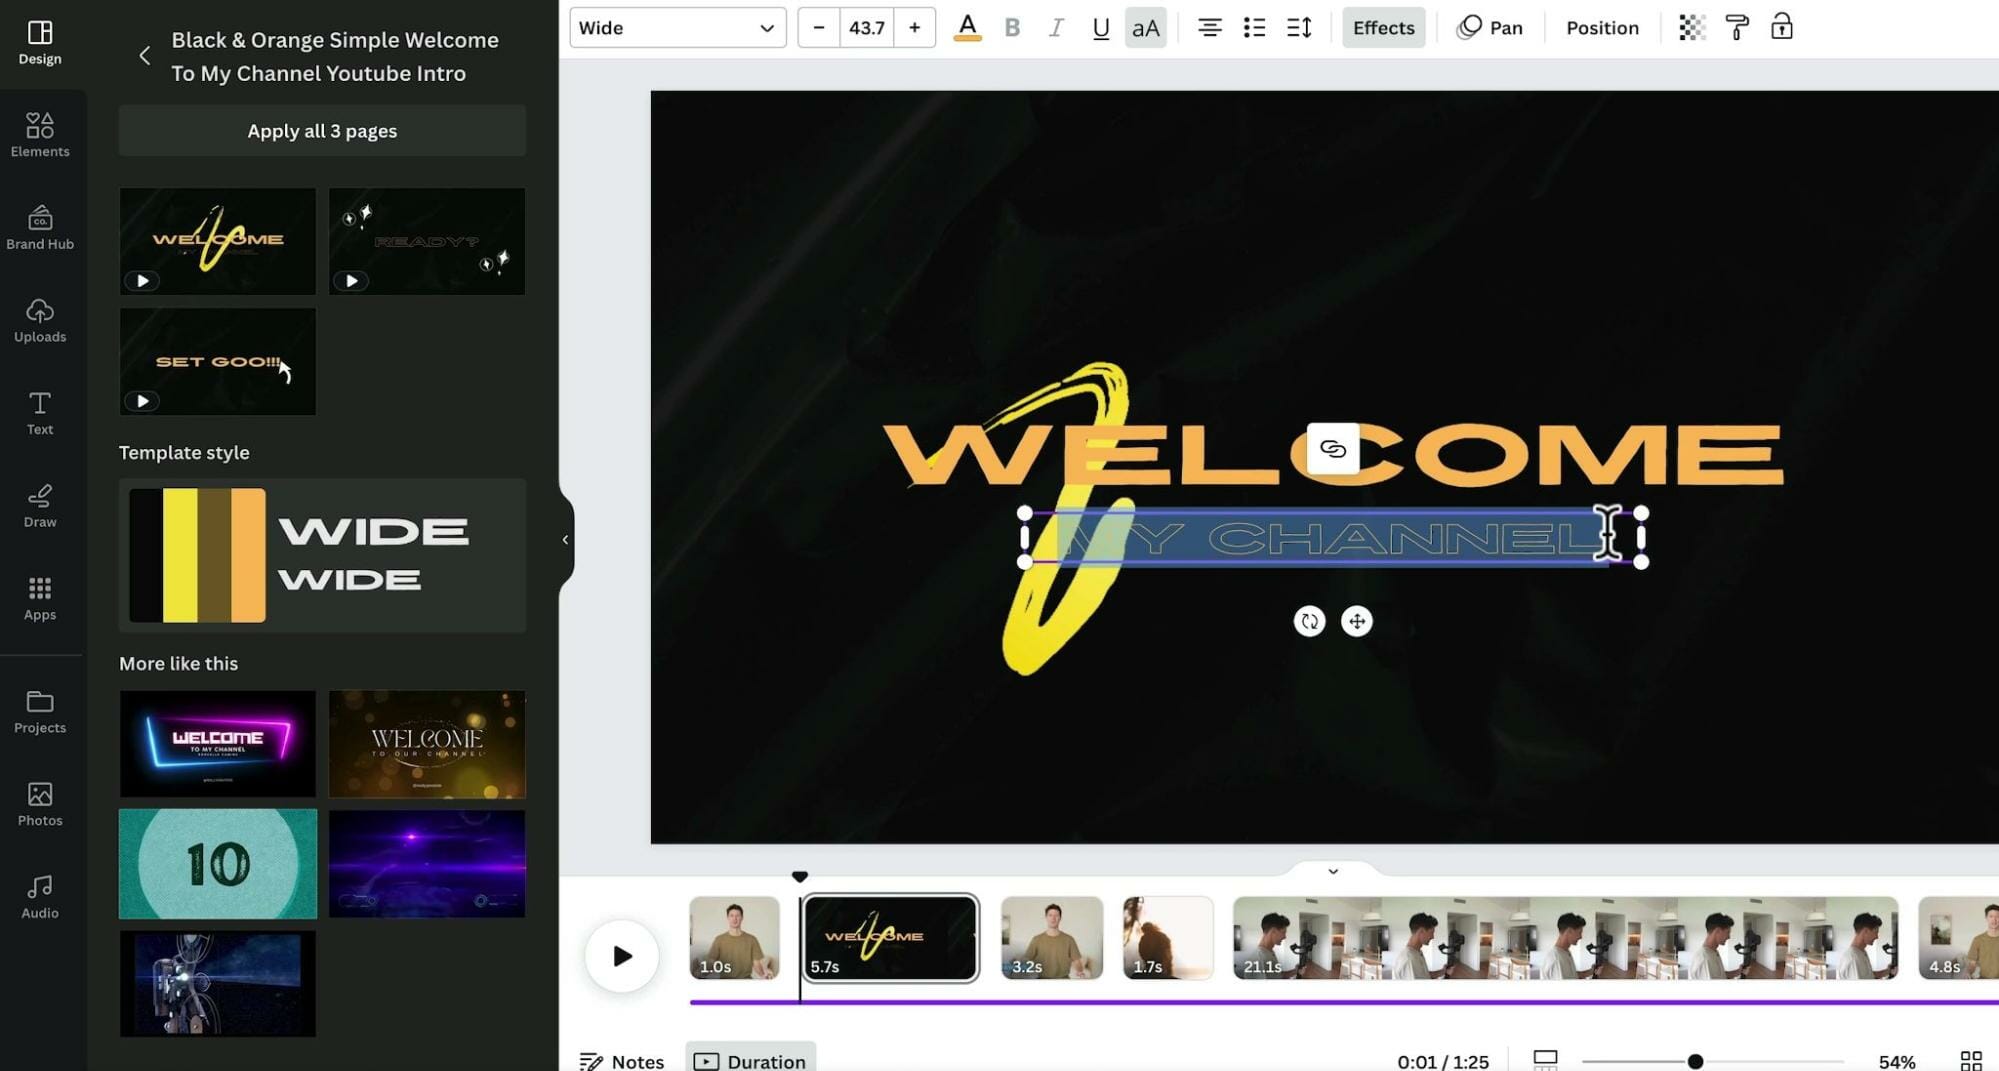 YouTube Intro template being edited in Canva canvas